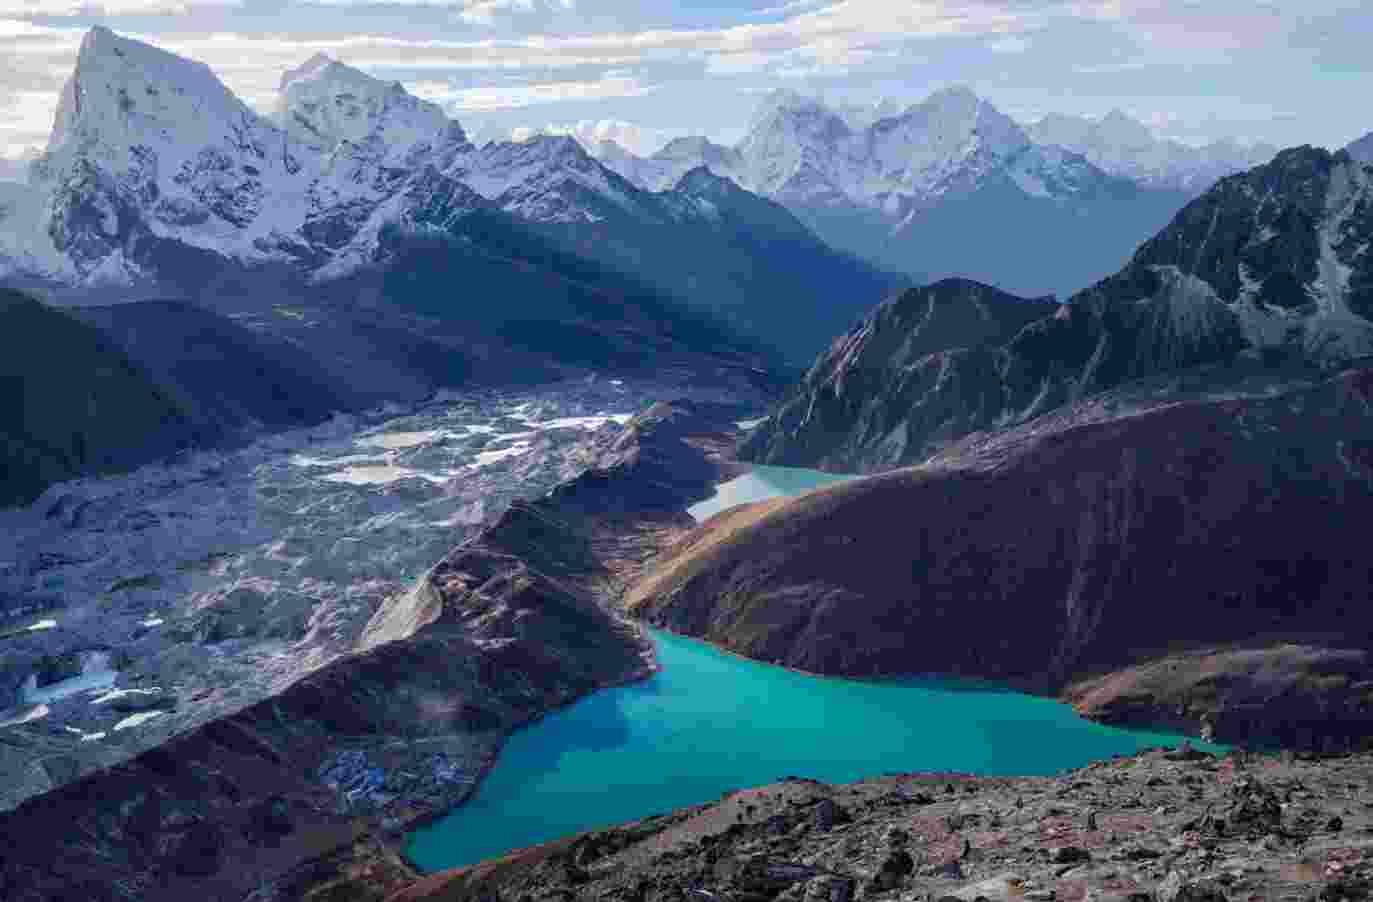 130 glacial lakes in Indian Himalayas show notable expansion, ISRO finds